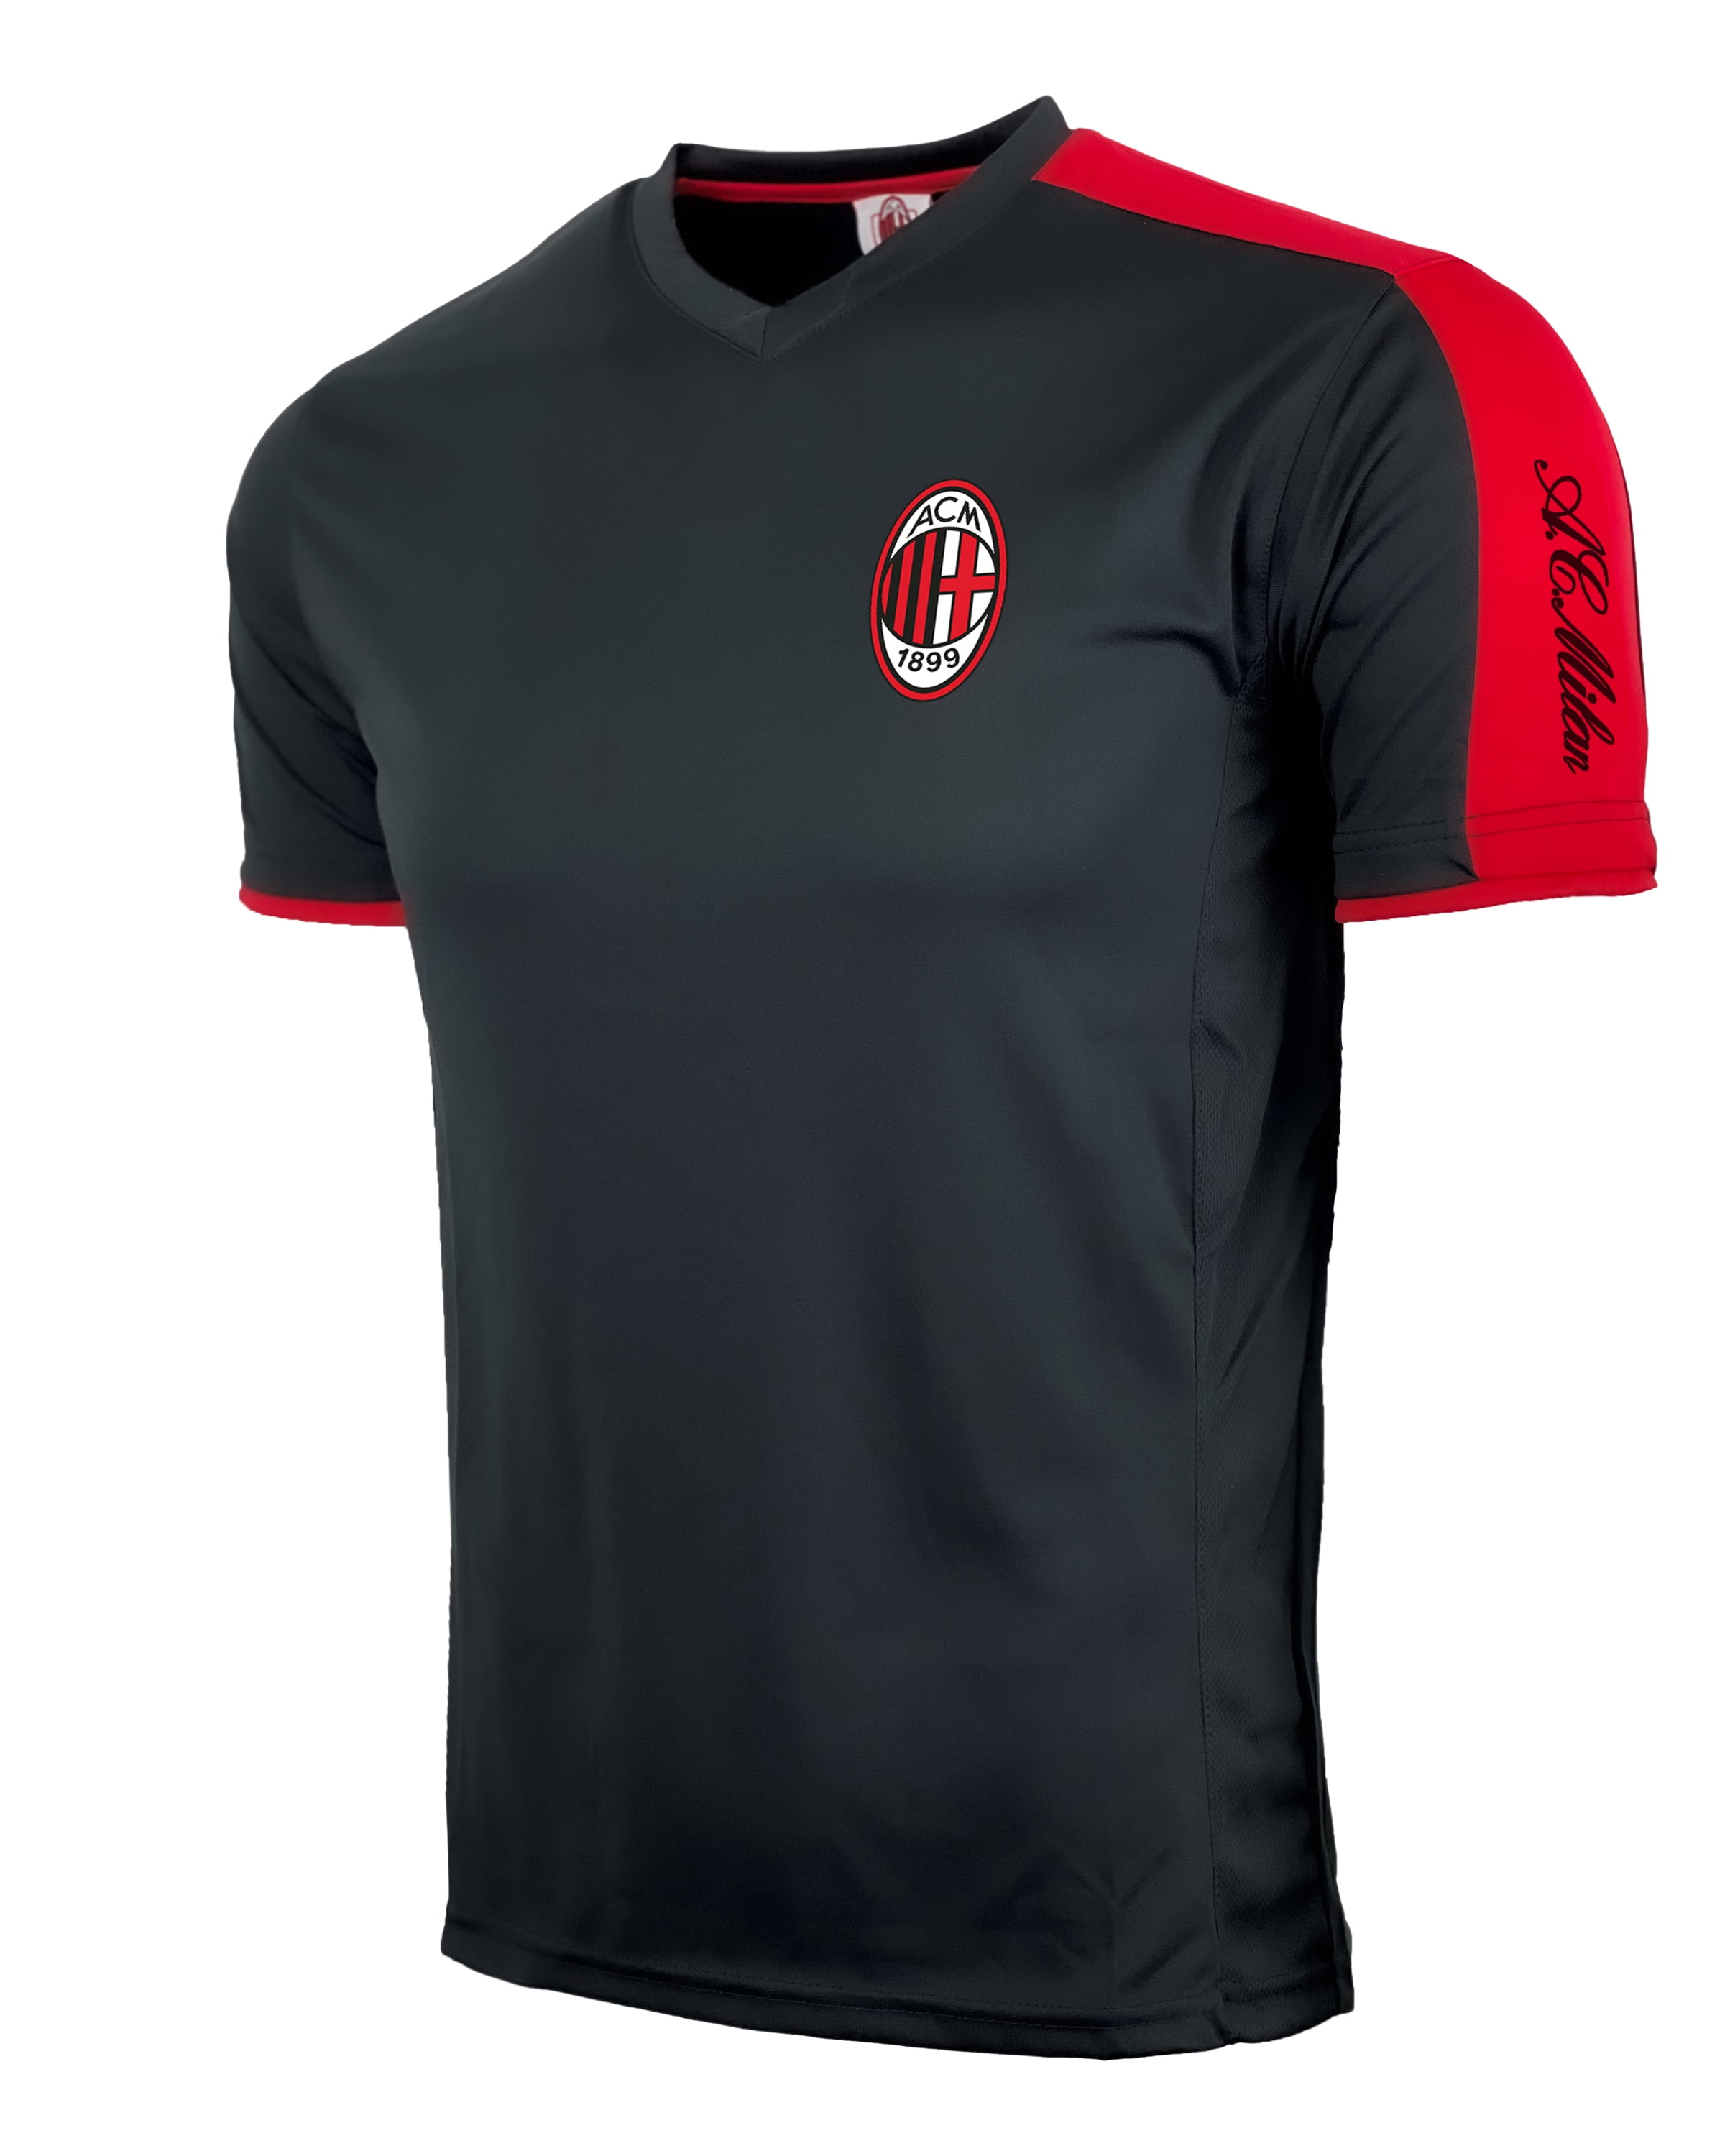 the waiter Serviceable downpour Boy's AC Milan Training Jersey, Licensed Youth A/C Milan Shirt (YL) -  Walmart.com